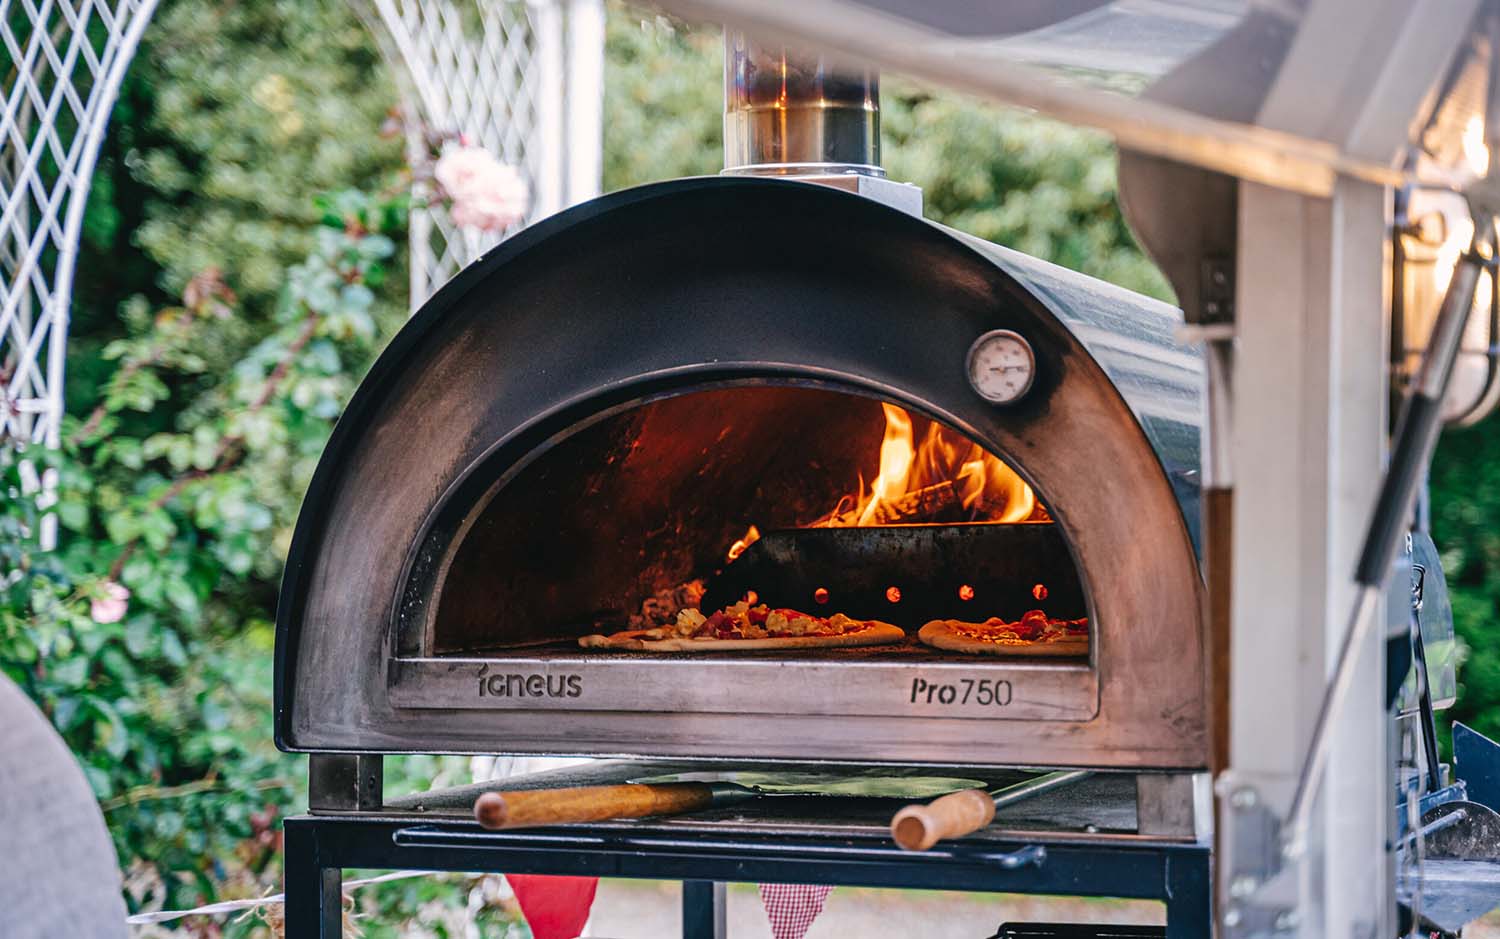 Best Commercial Pizza Ovens - Igneus Pro 750 wood fired pizza oven uk